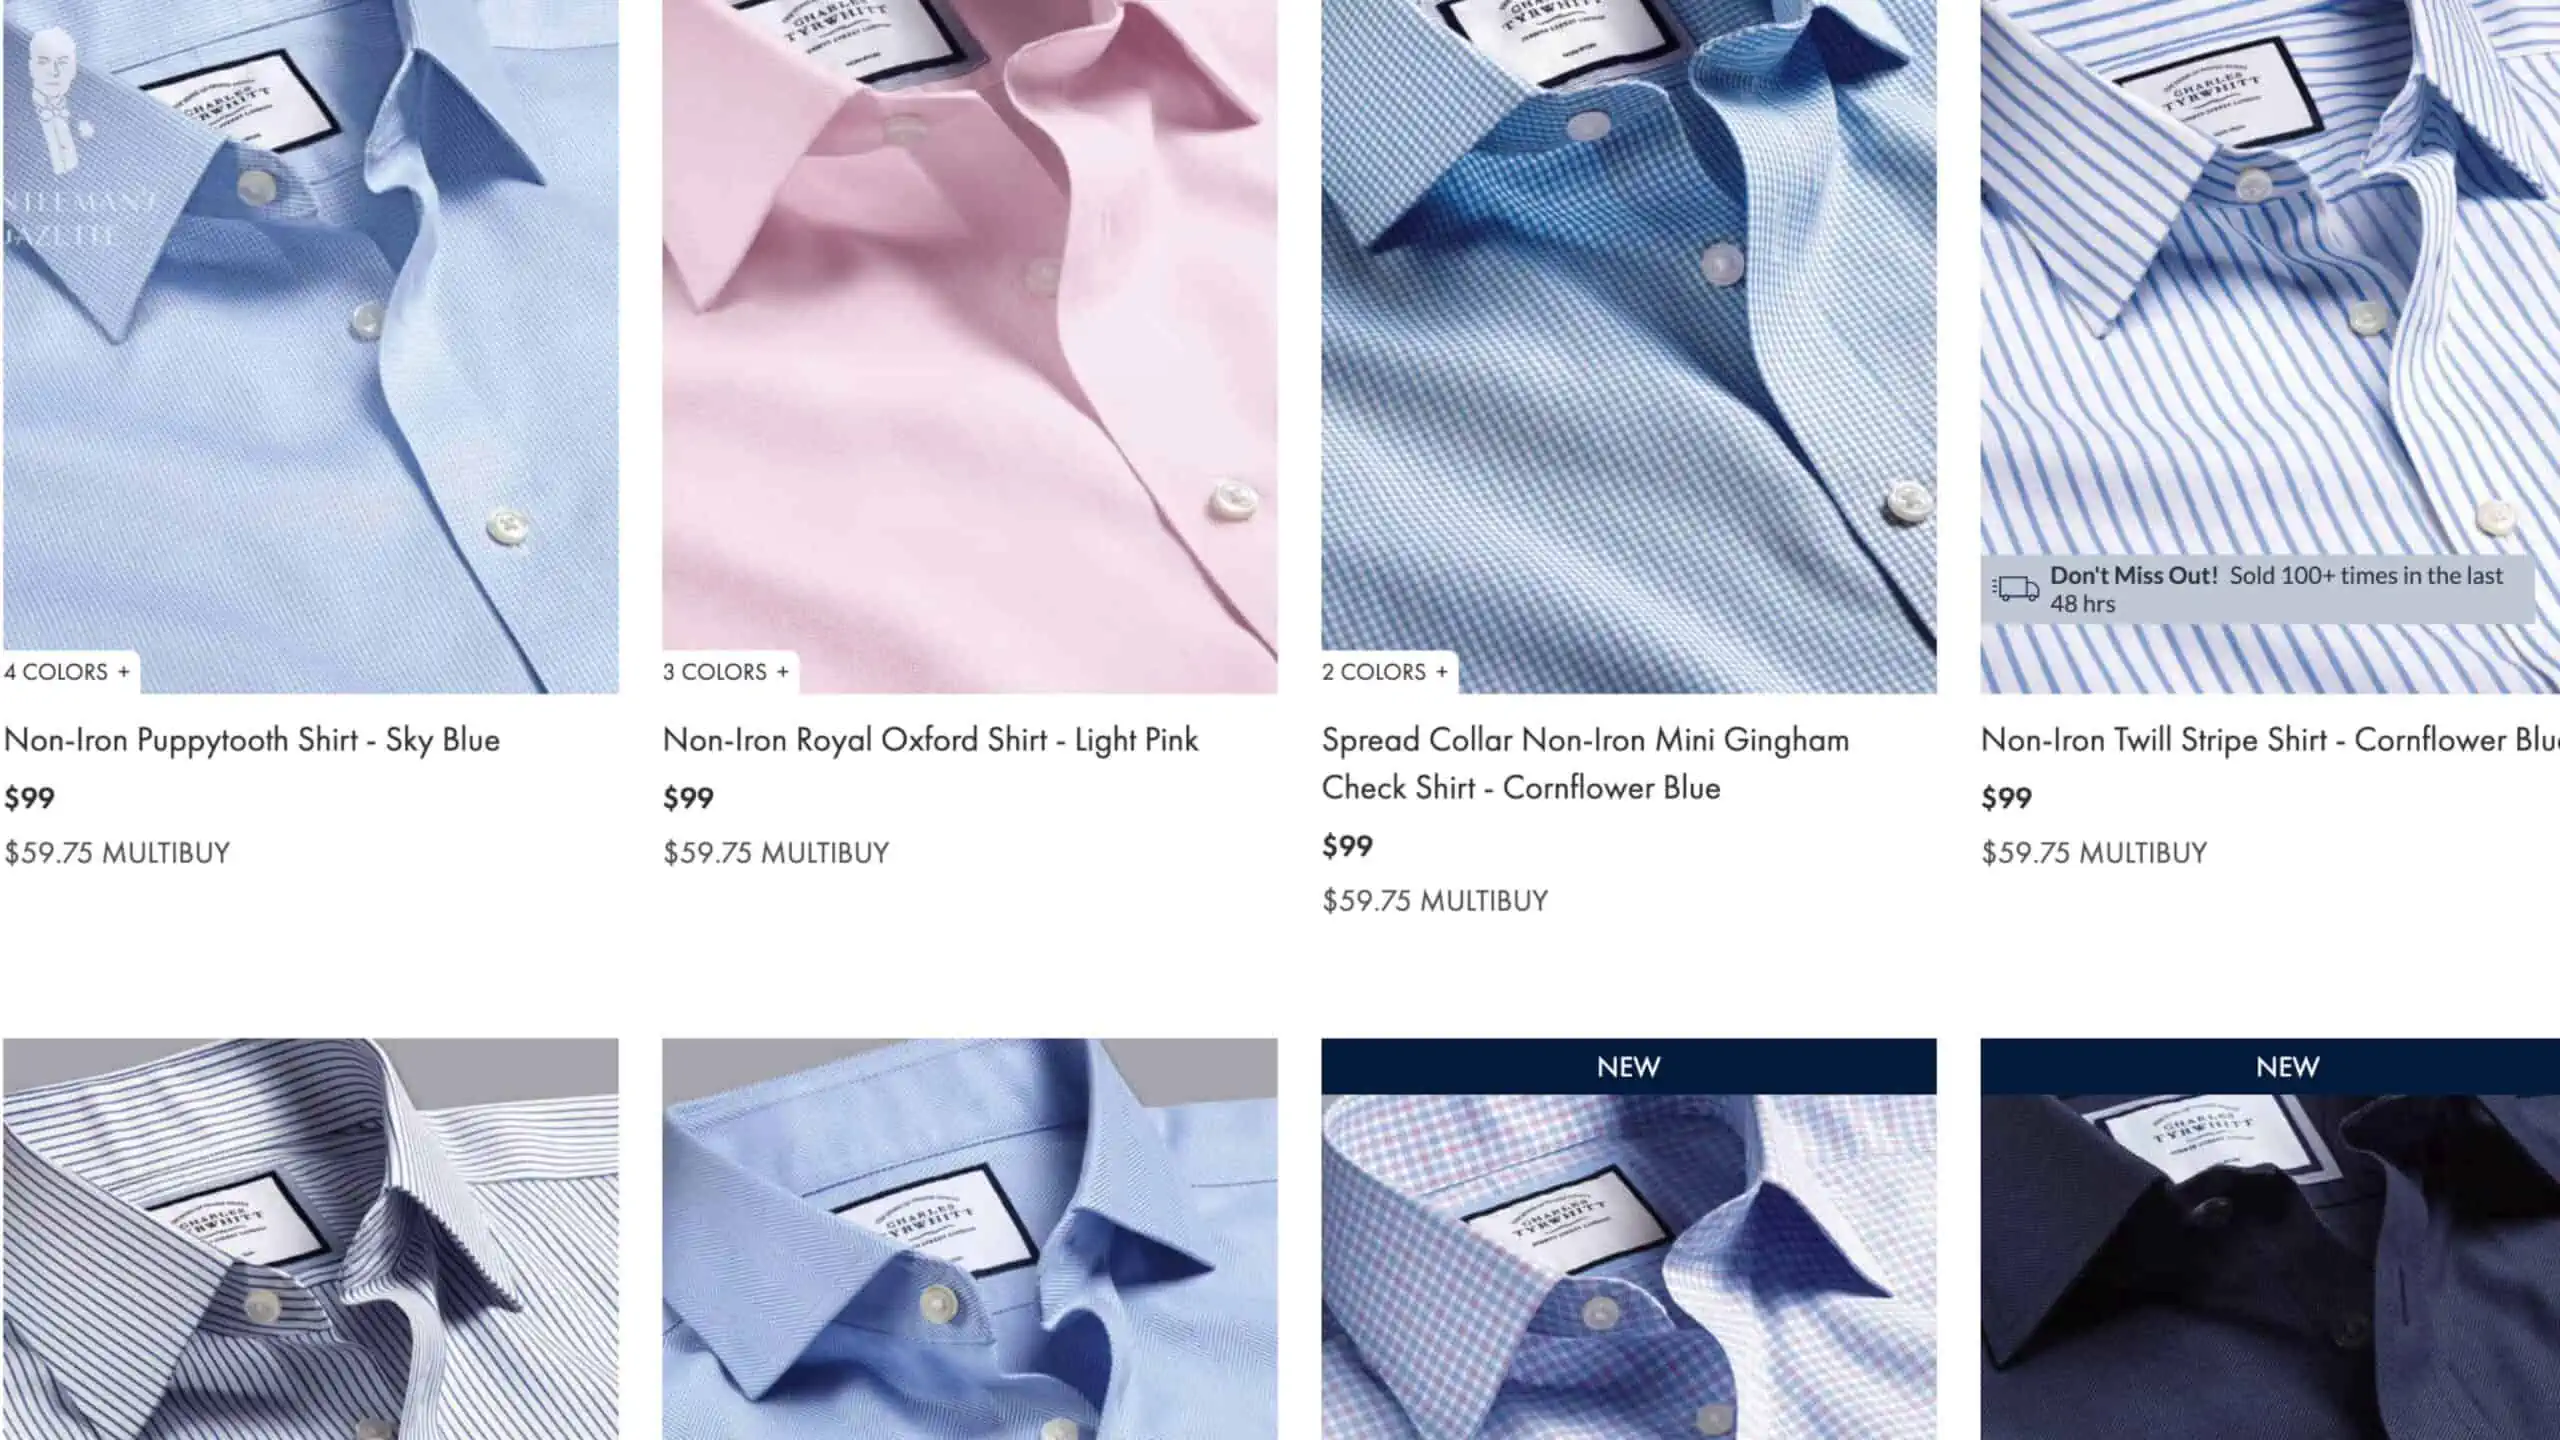 Carries a solid choice of different colors yet adventurous take when it comes to their shirts.